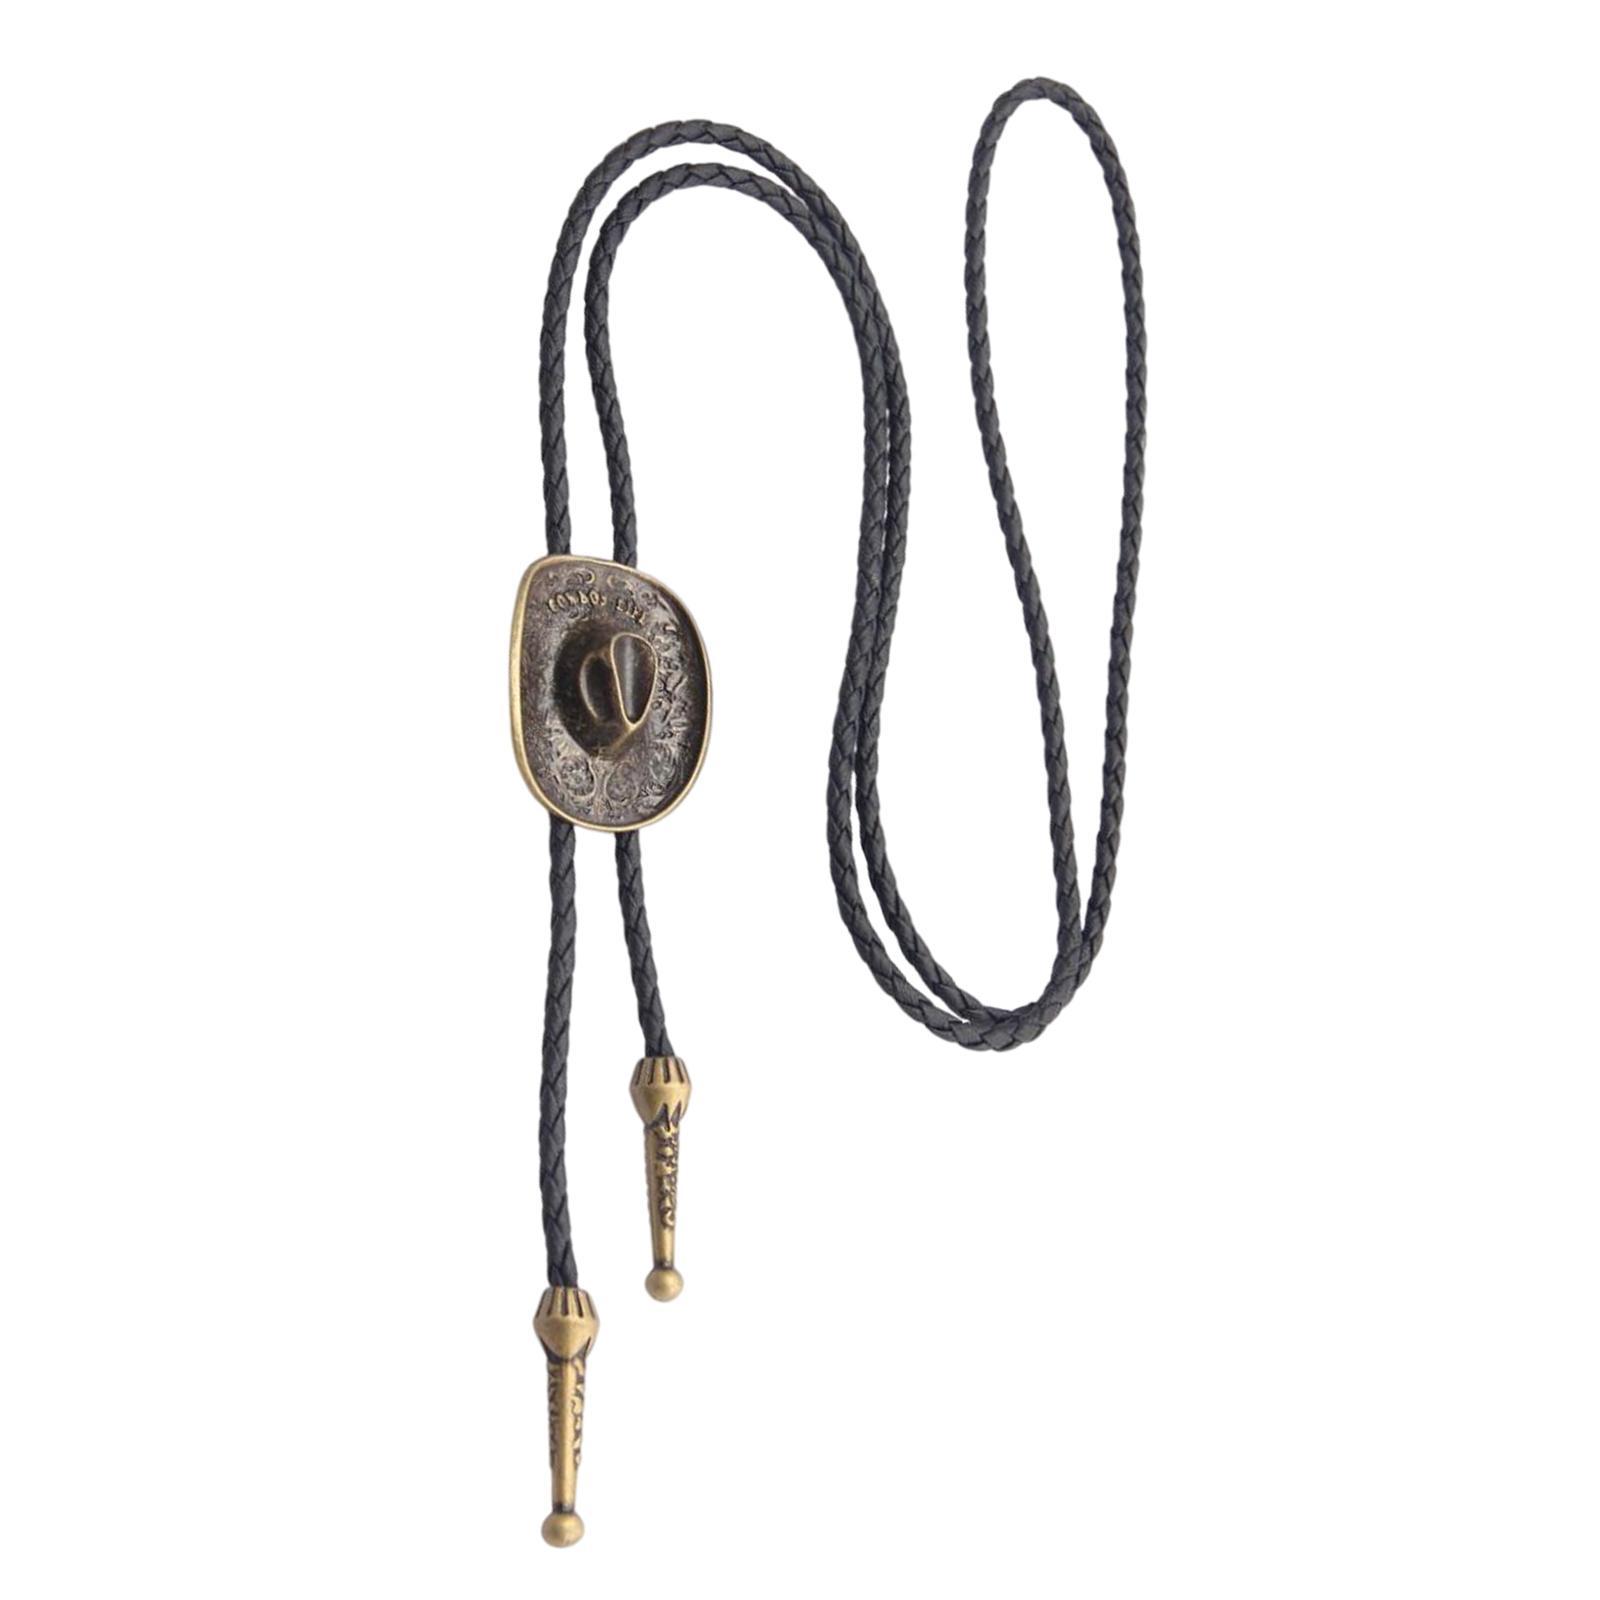 Western Cowboy Hat Bolo Tie Vintage Costume Accessories Necklace for Halloween Party